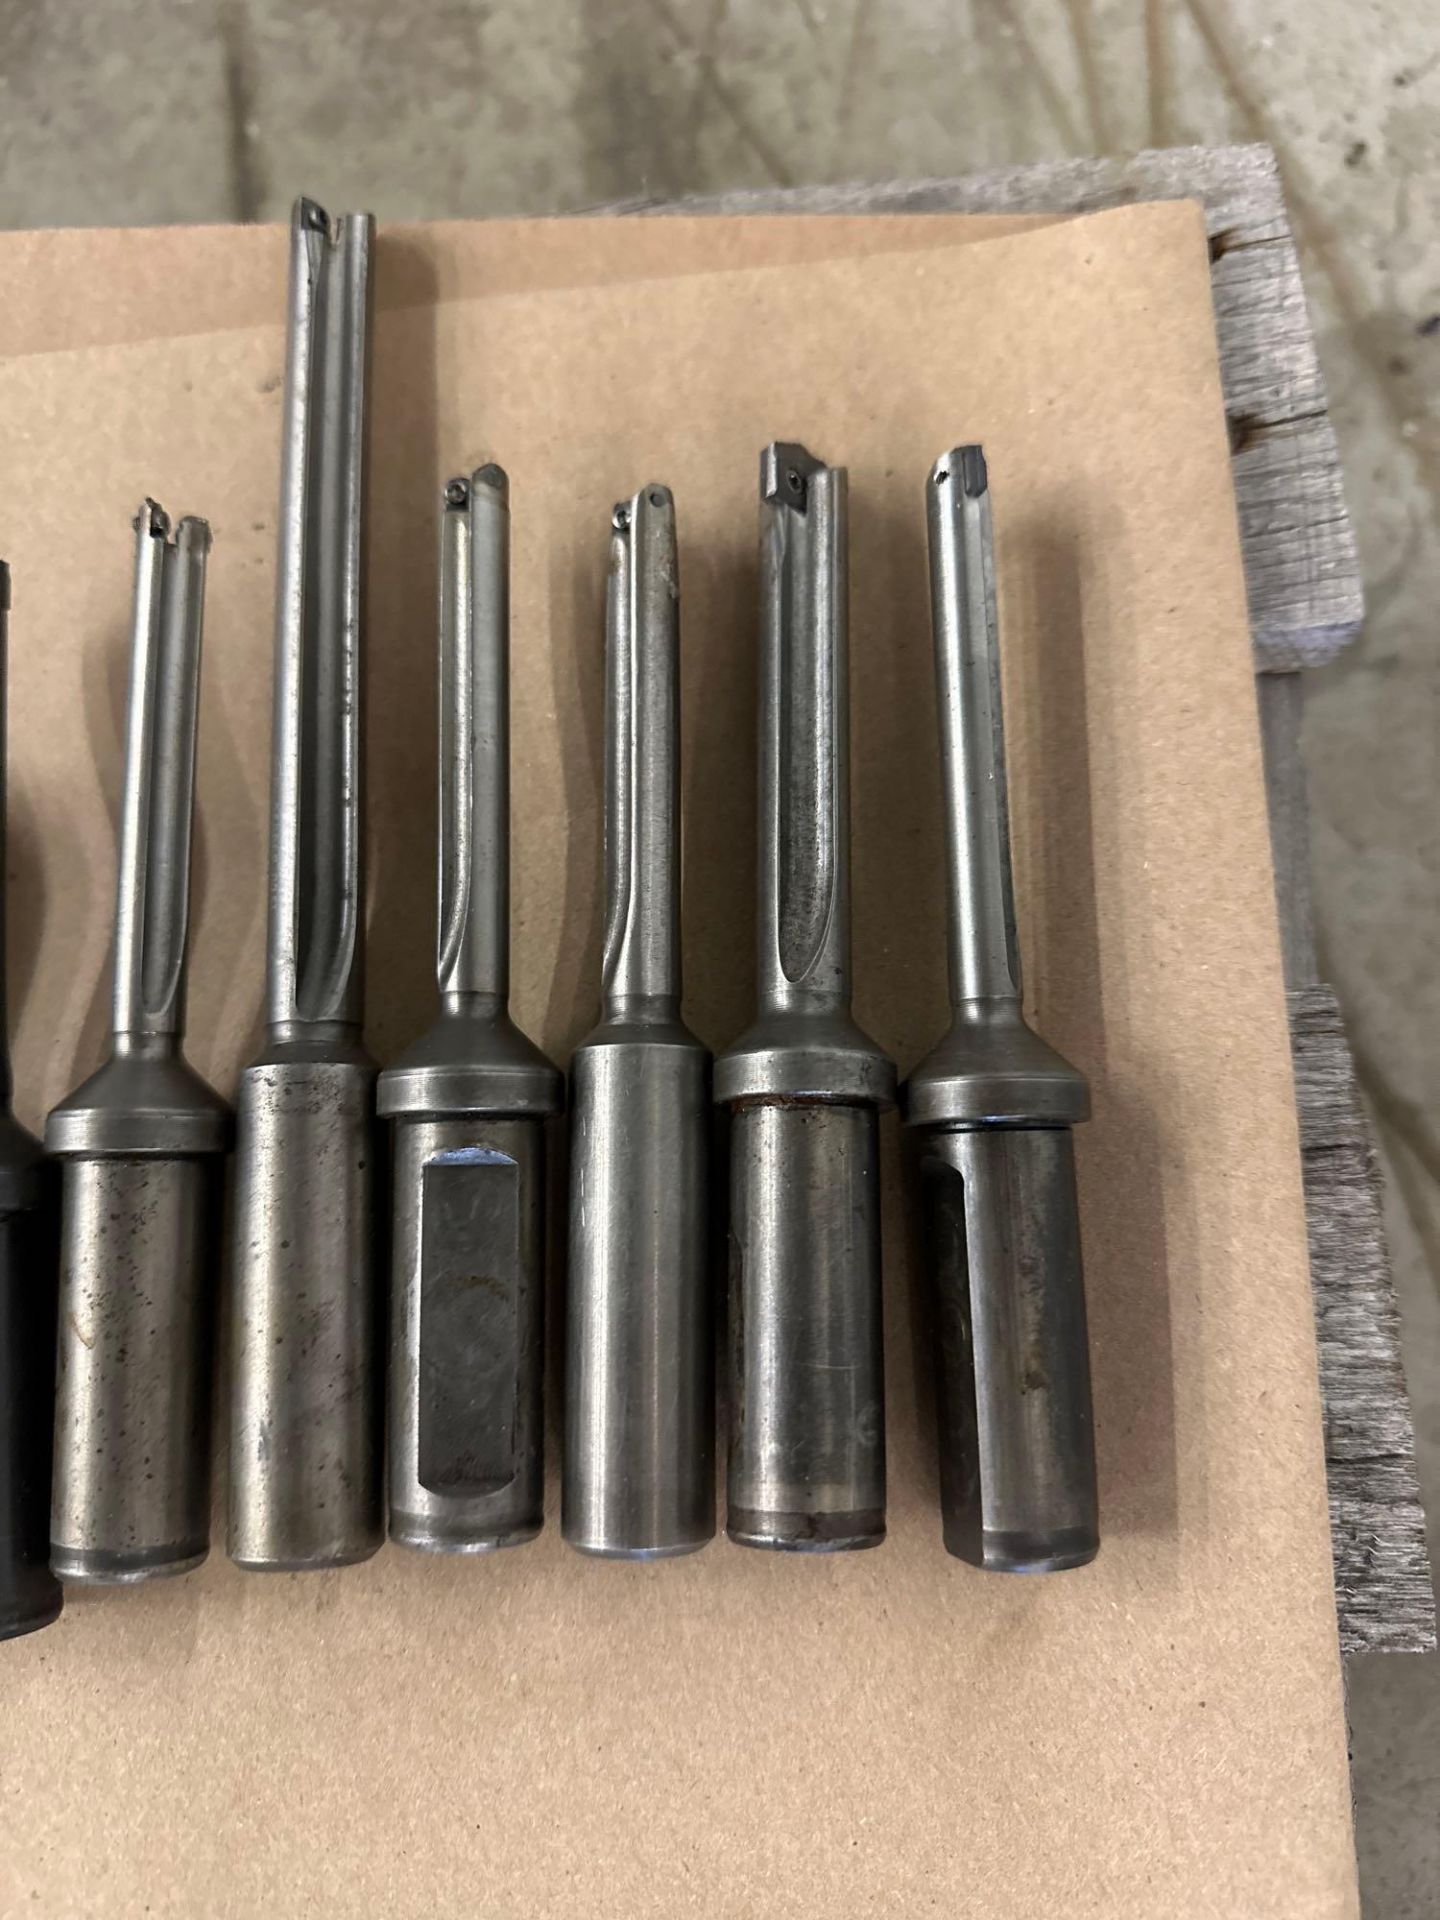 Lot of 9 Assorted Spade Insert Boring Bars Size Ranging From: 3/4” X 4 5/8” to 3/4” X 7 3/4” - Bild 5 aus 6